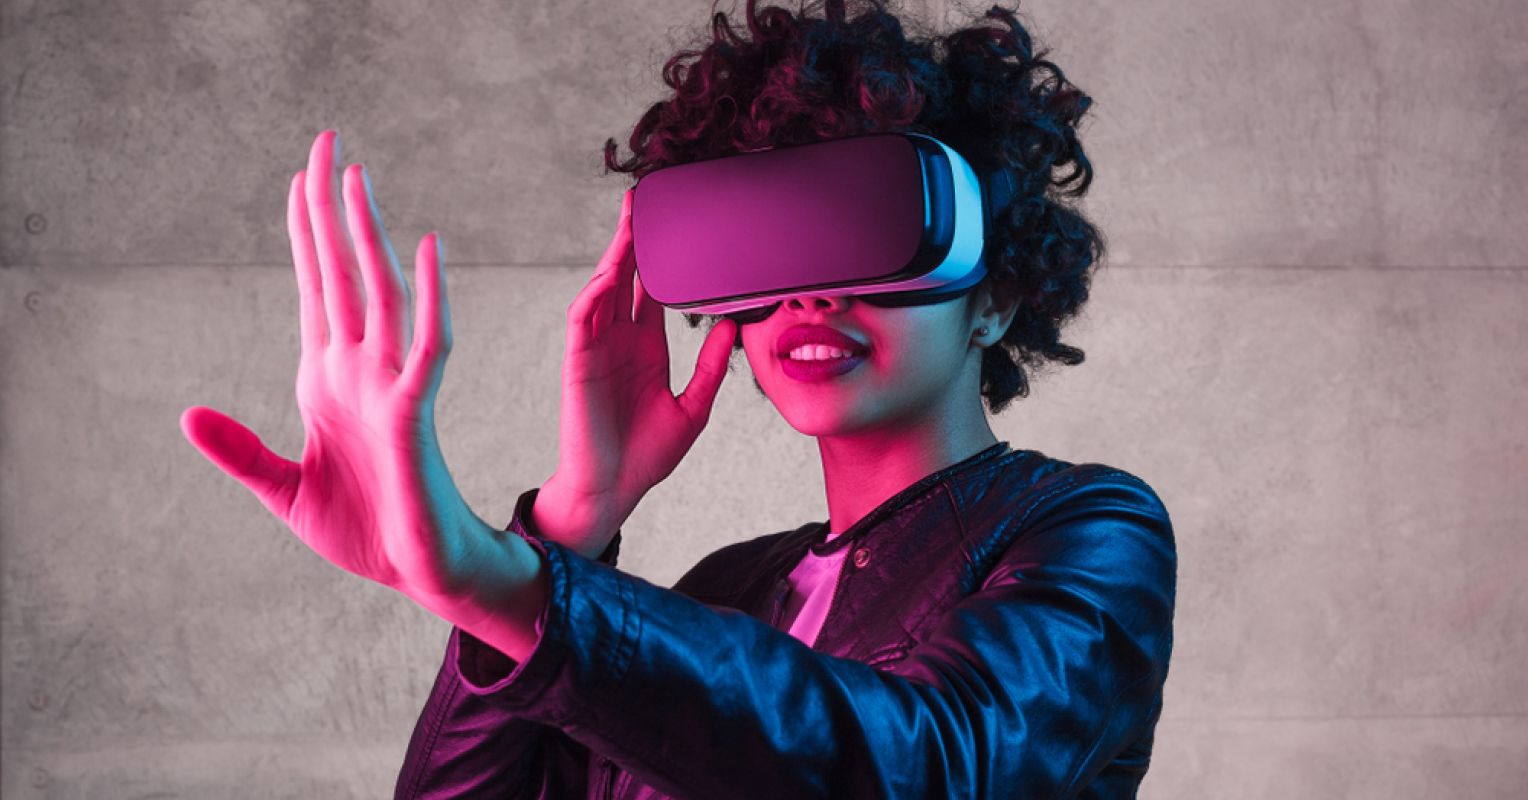 Inside the Datingverse: Guide to Virtual Reality | Psychology Today